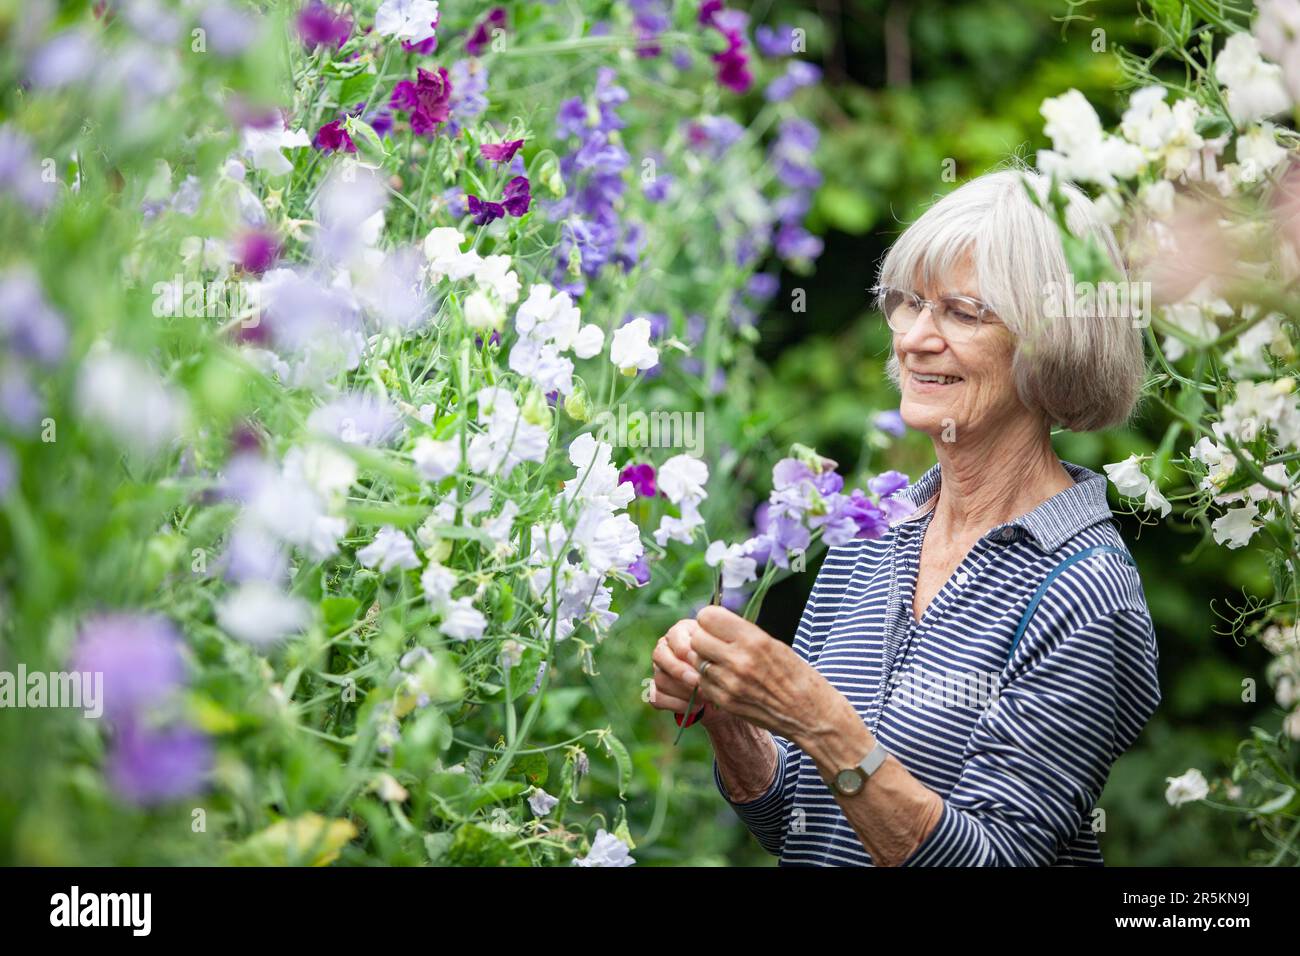 A woman in her 70s picking sweetpea flowers. Anna Watson/Alamy Stock Photo